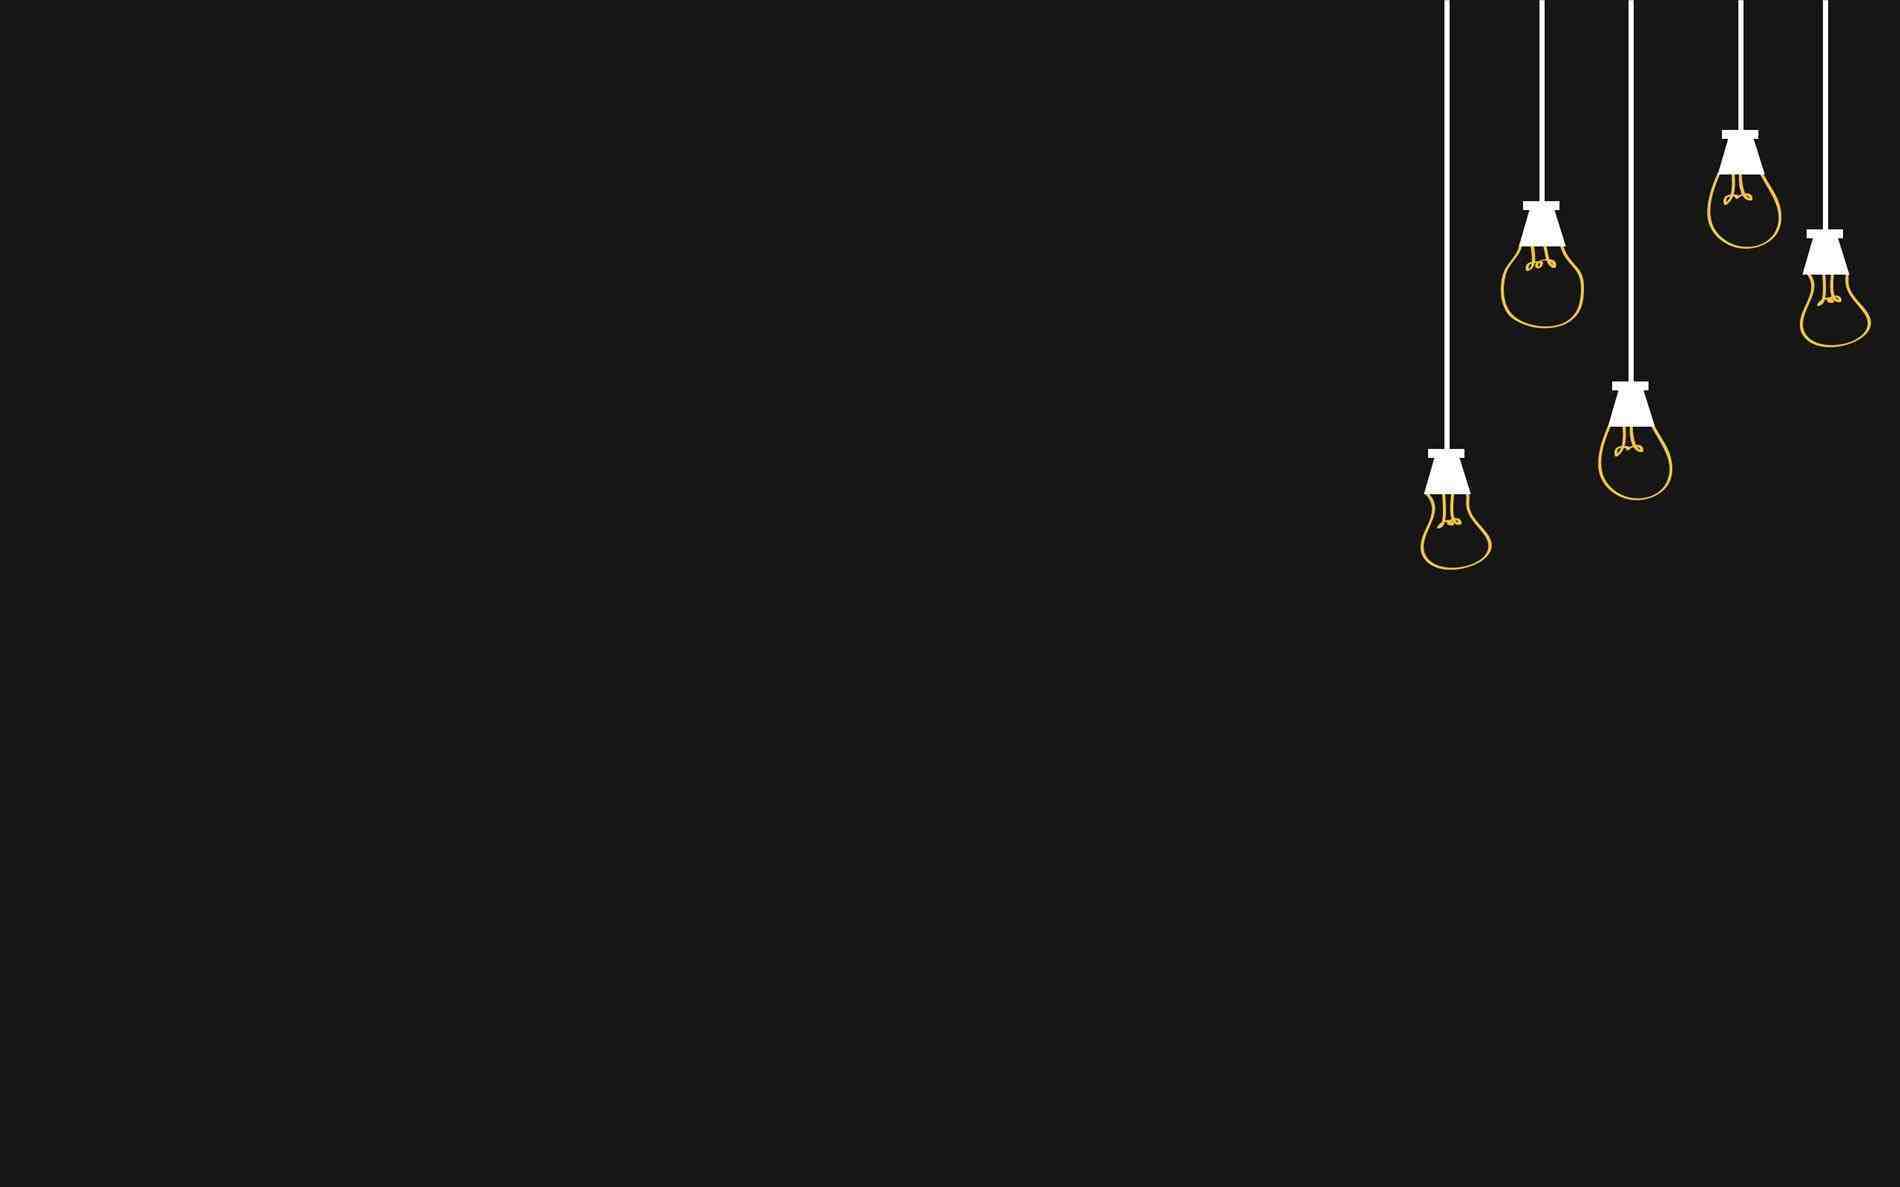 A black background with hanging light bulbs - Simple